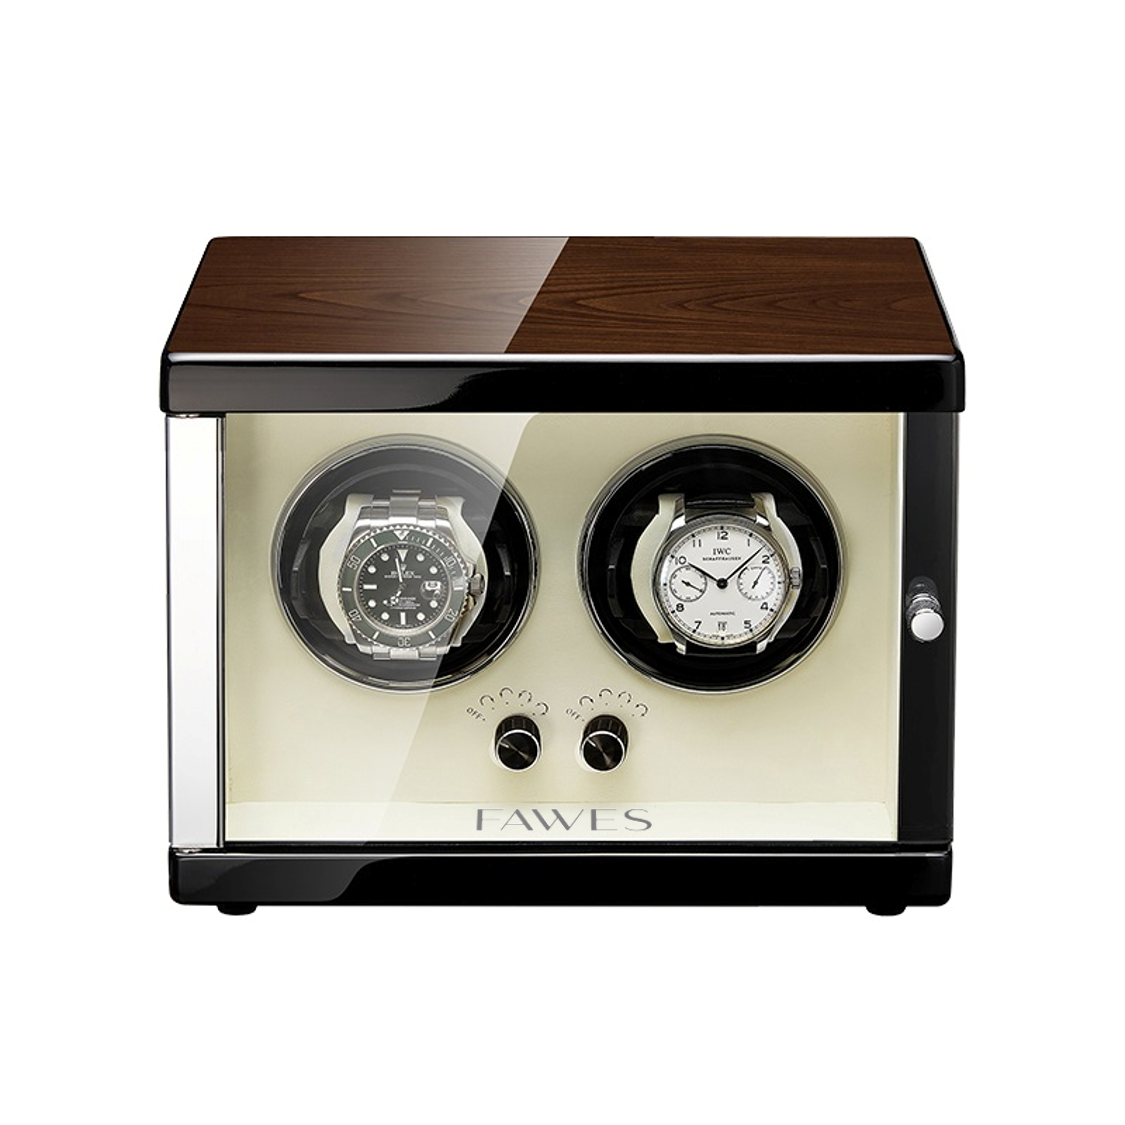 X31 Classic Automatic Watch Winder - 2 Epitope